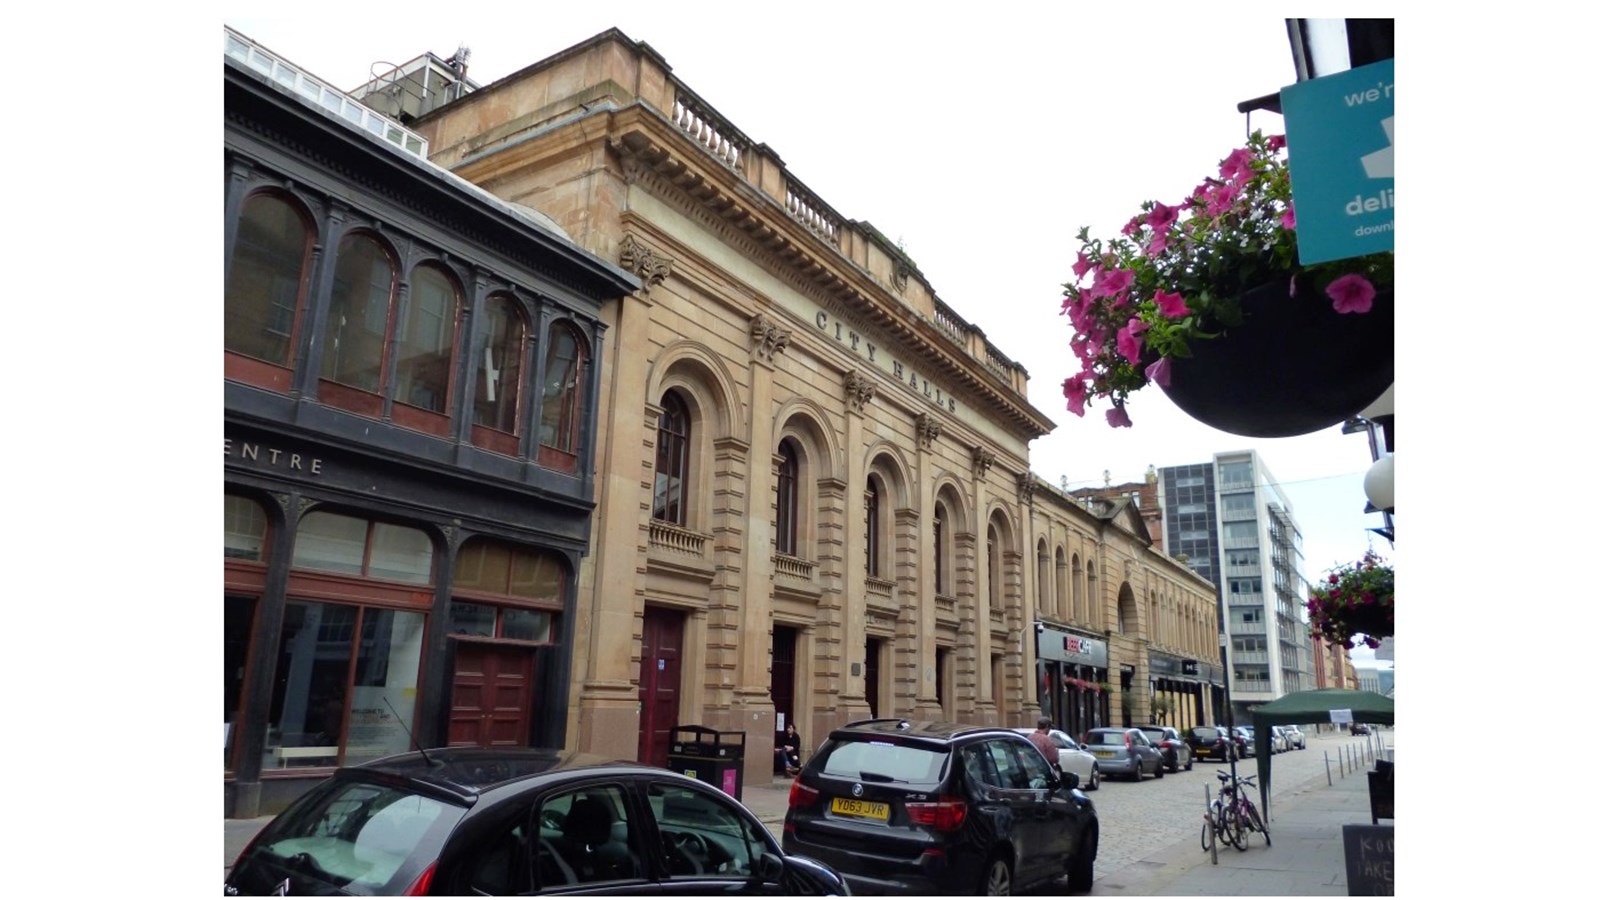 an image showing the front of Glasgow City Halls - the building has 5 tall archways along the facade.